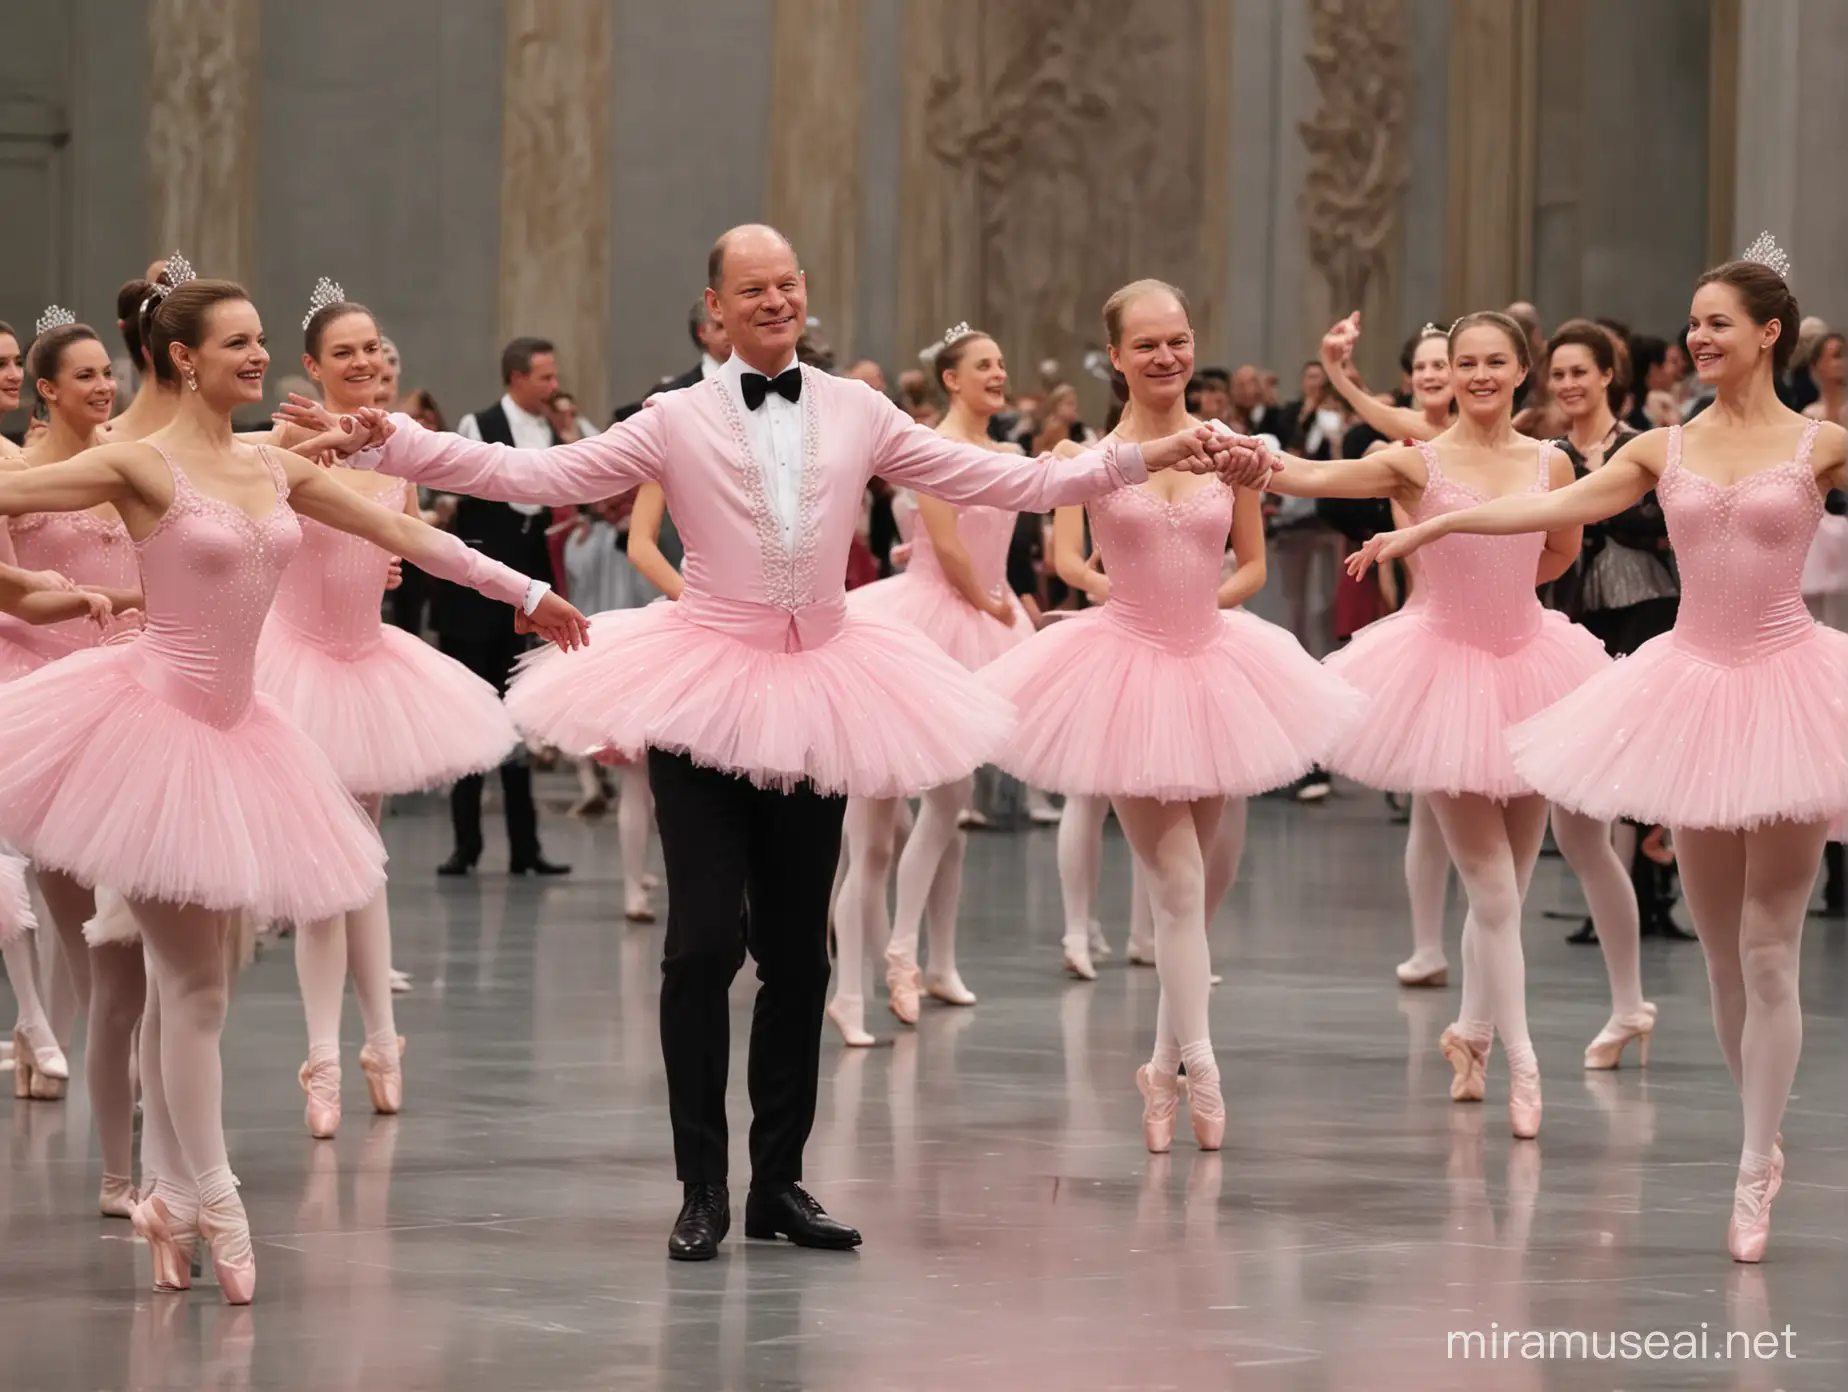 German Chancellor Olaf Scholz dances in a pink ballet dress to Swan Lake at the opera.